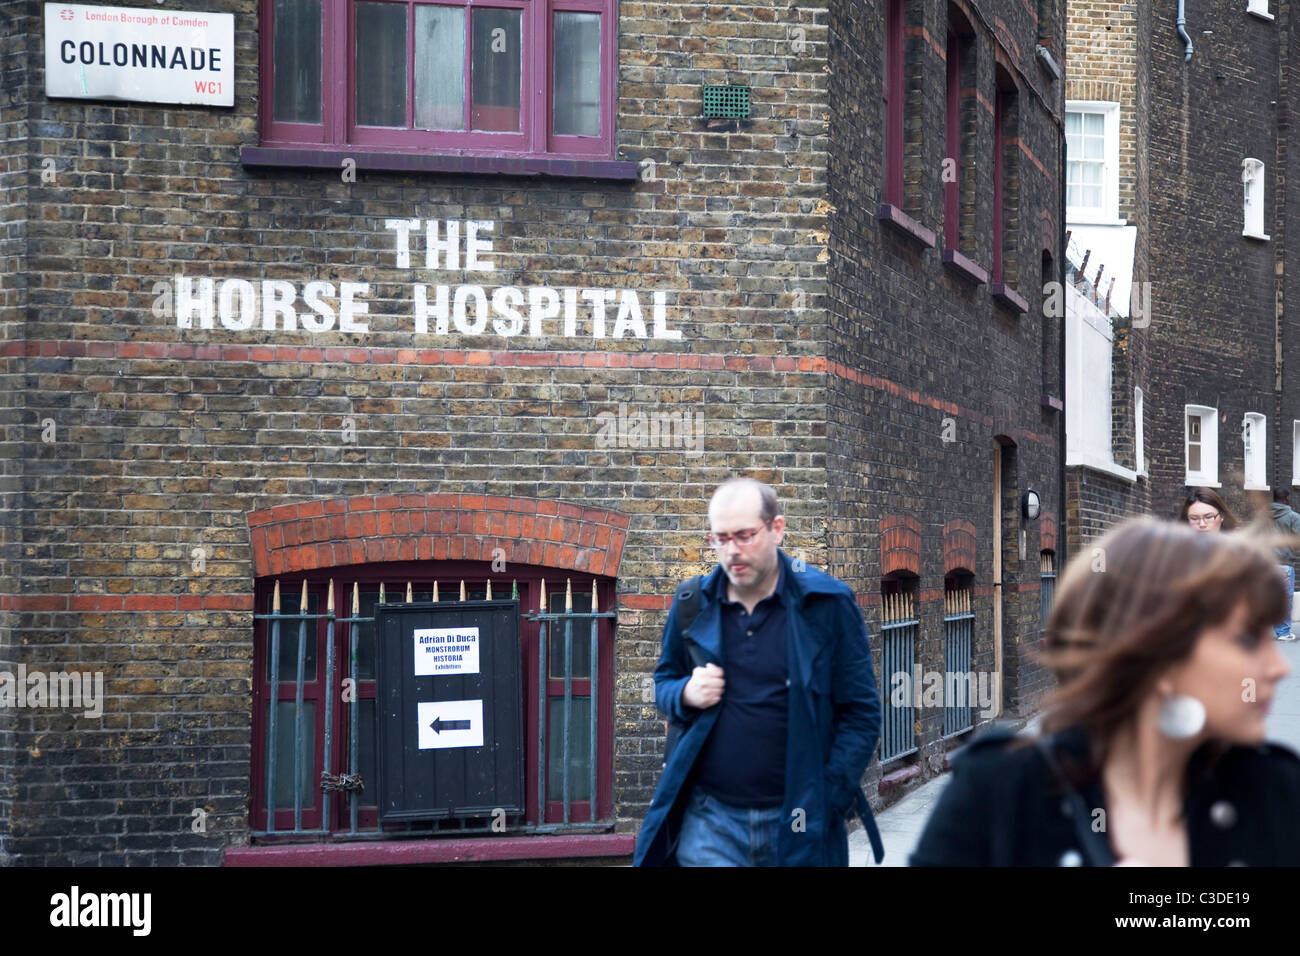 The Horse Hospital on Colonnade, London, is an arts venue where all areas of art are represented. Stock Photo